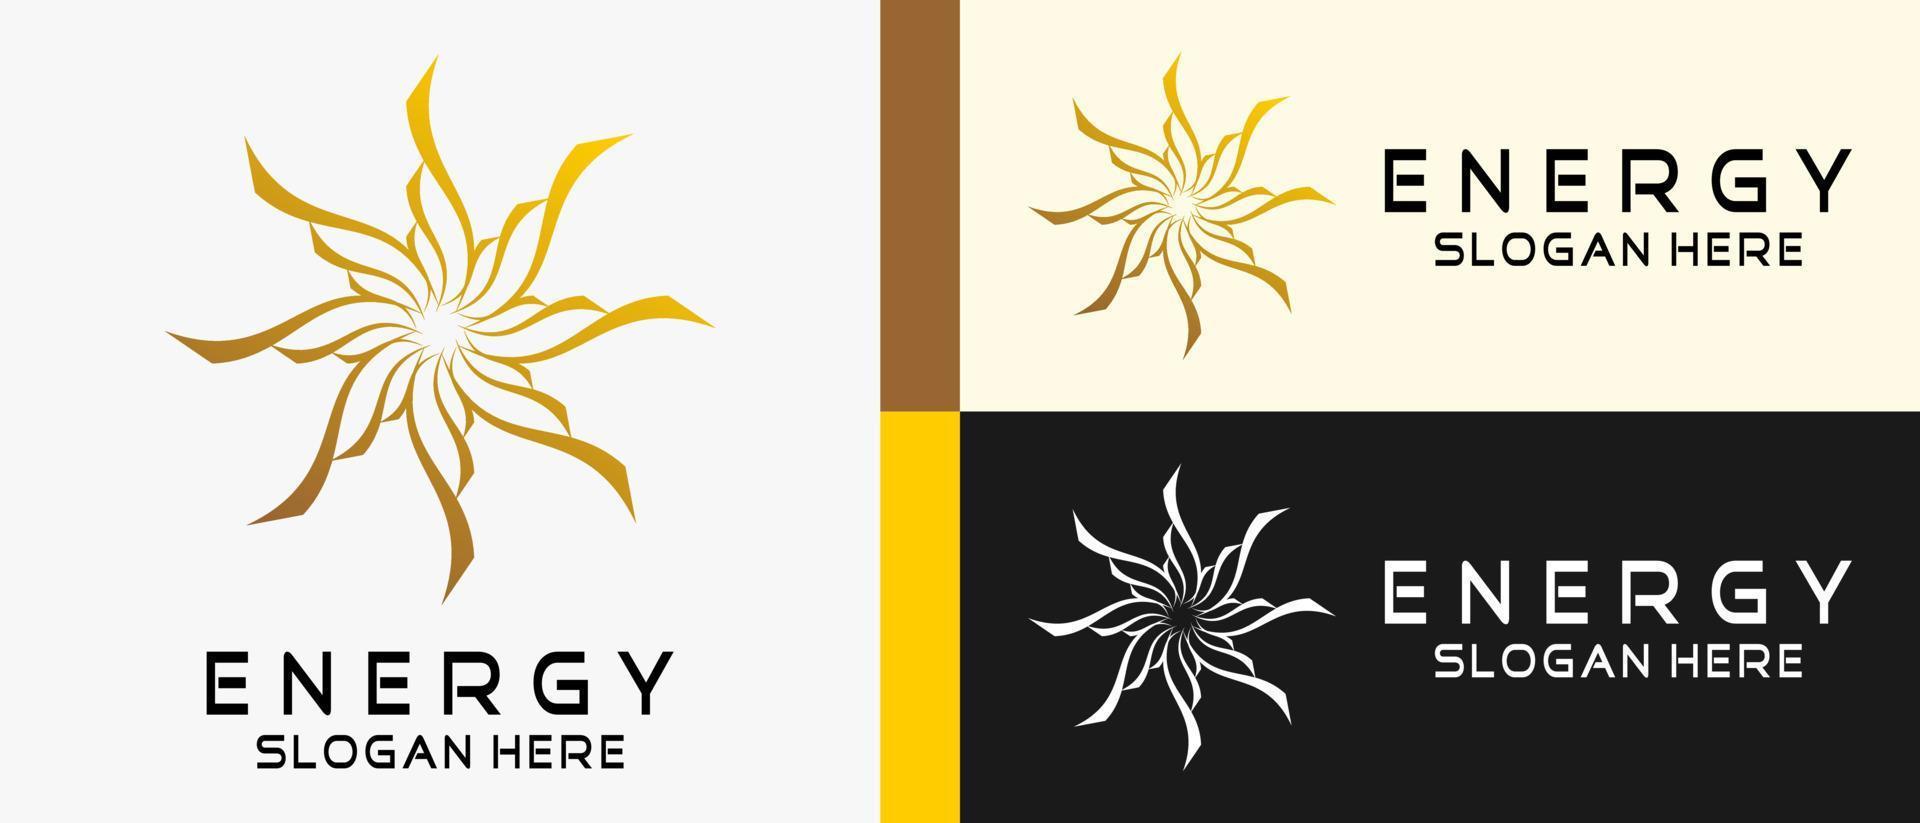 energy logo design template with creative abstract concept of flower shape rotating art. premium vector logo illustration